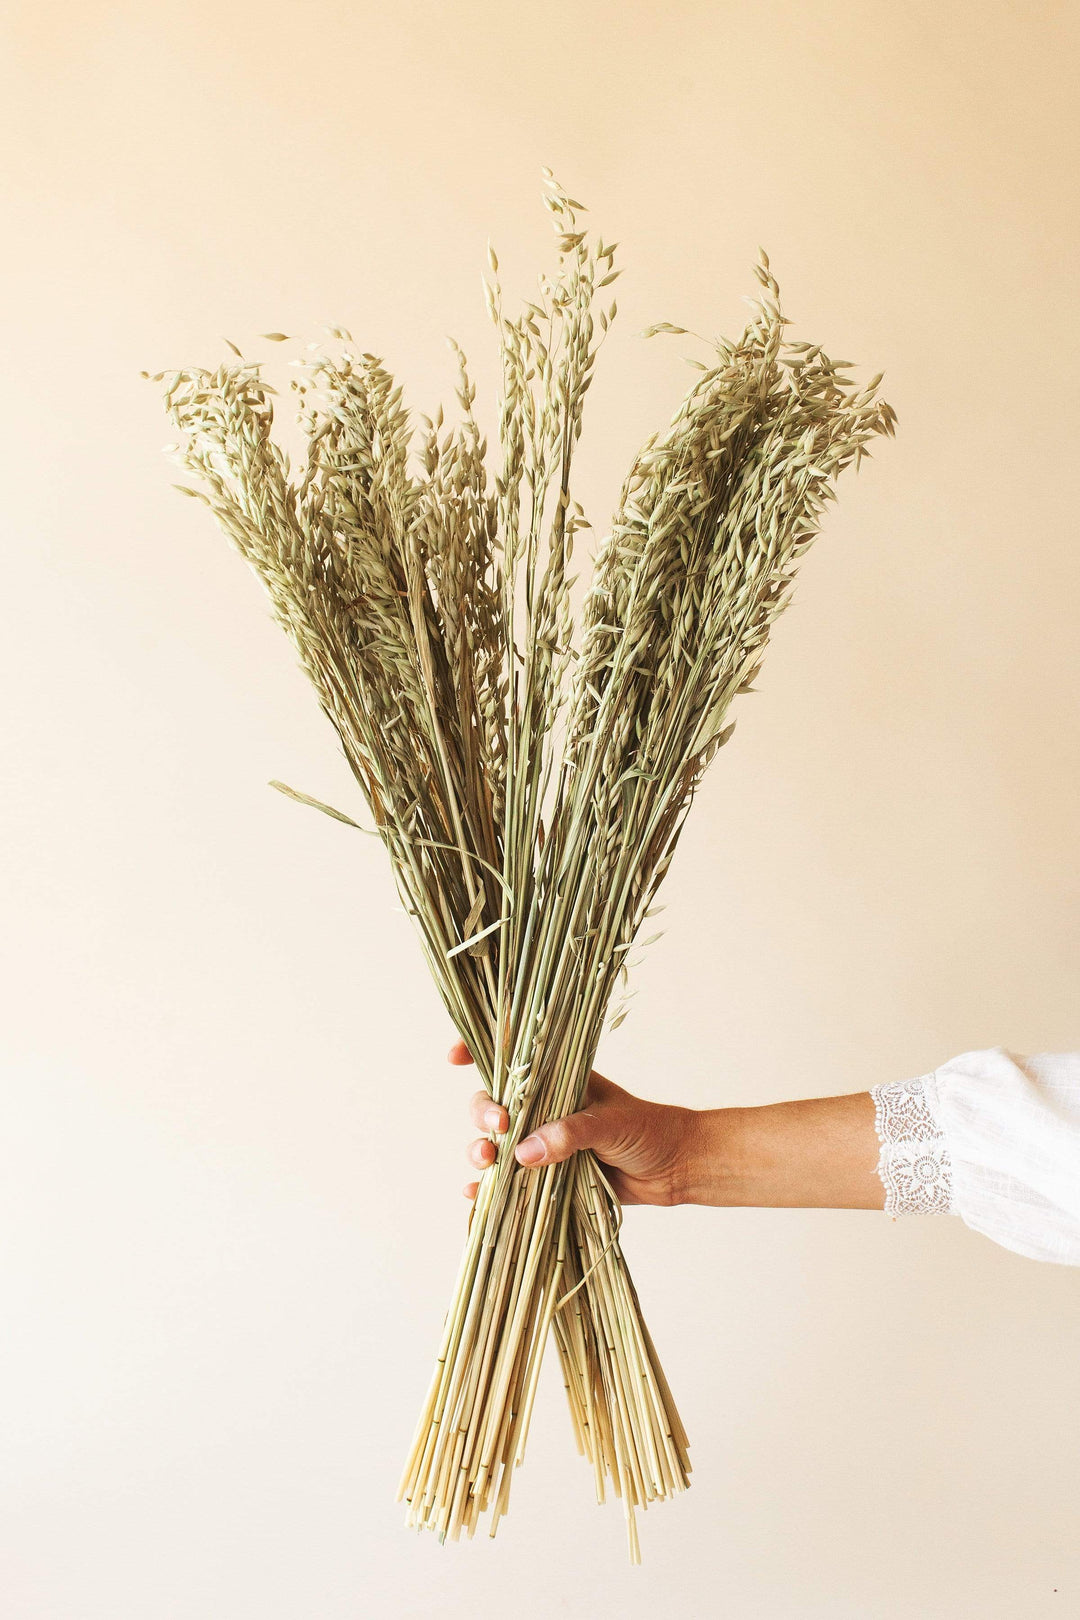 Idlewild Floral Co. Aveena Oat Grass